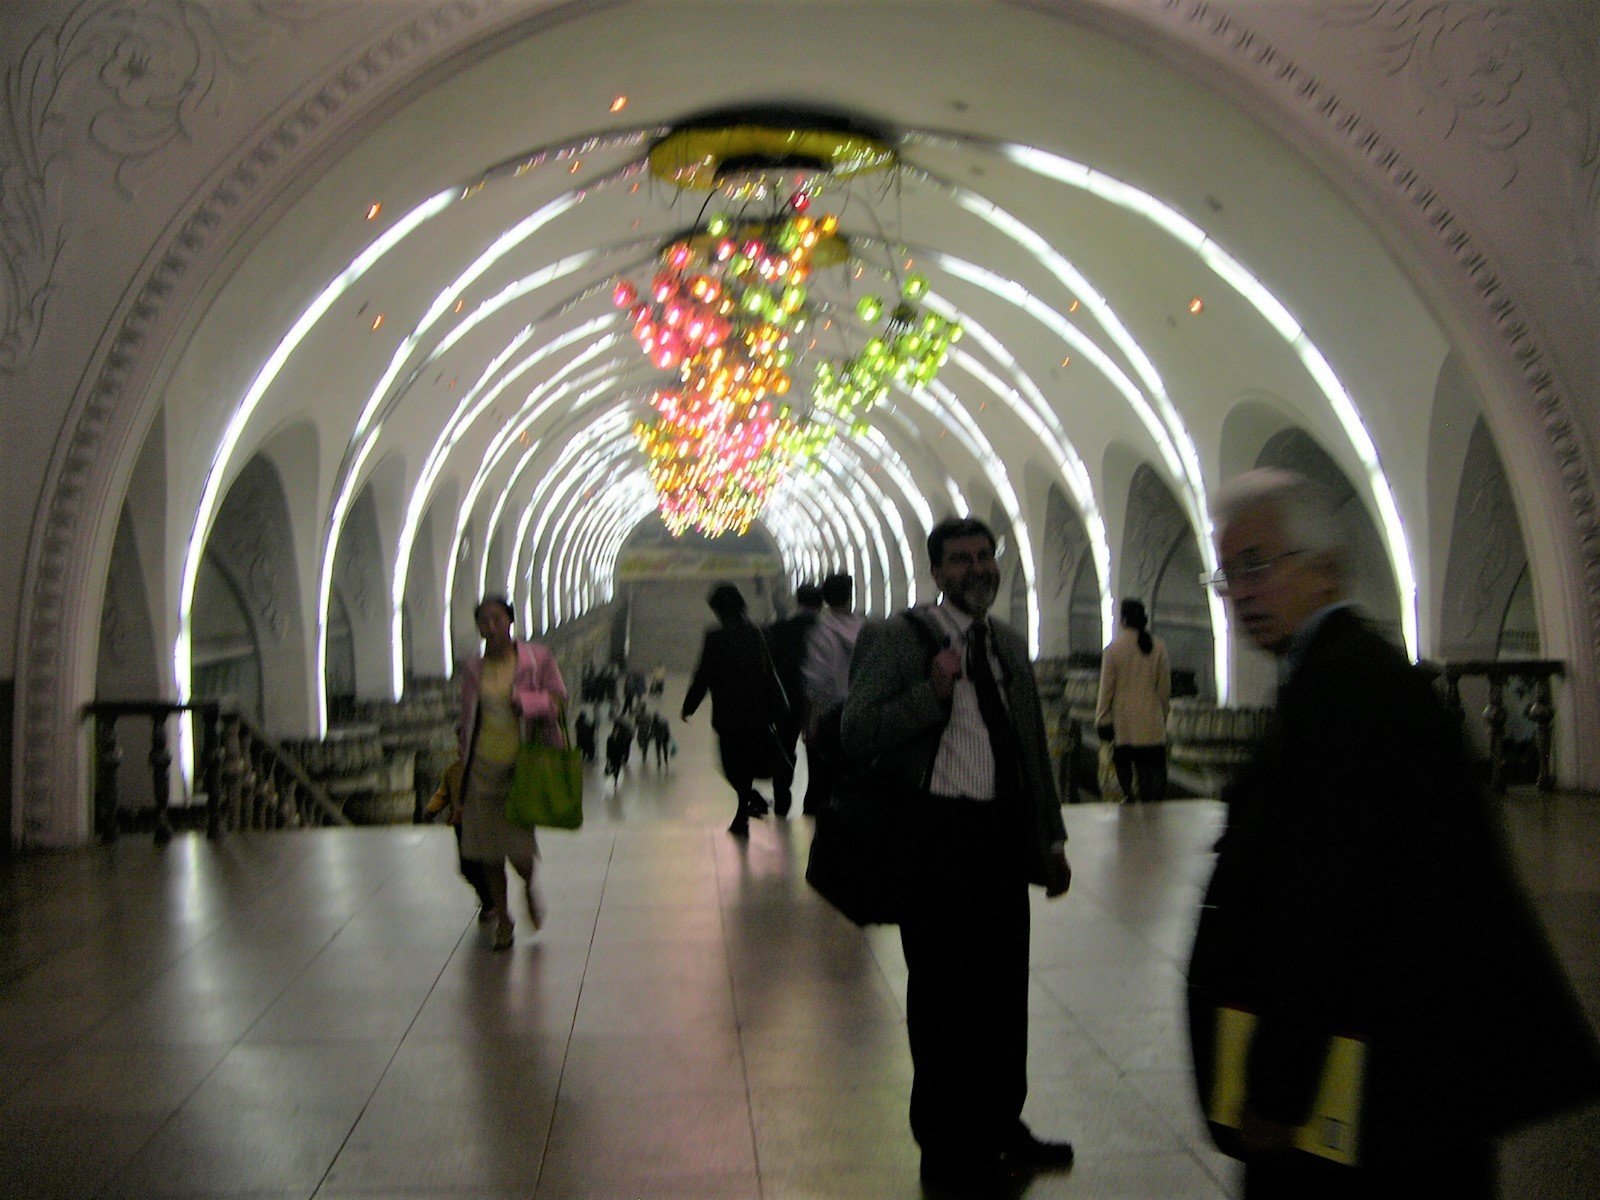 Vista into a marble-decorated arched subway platform